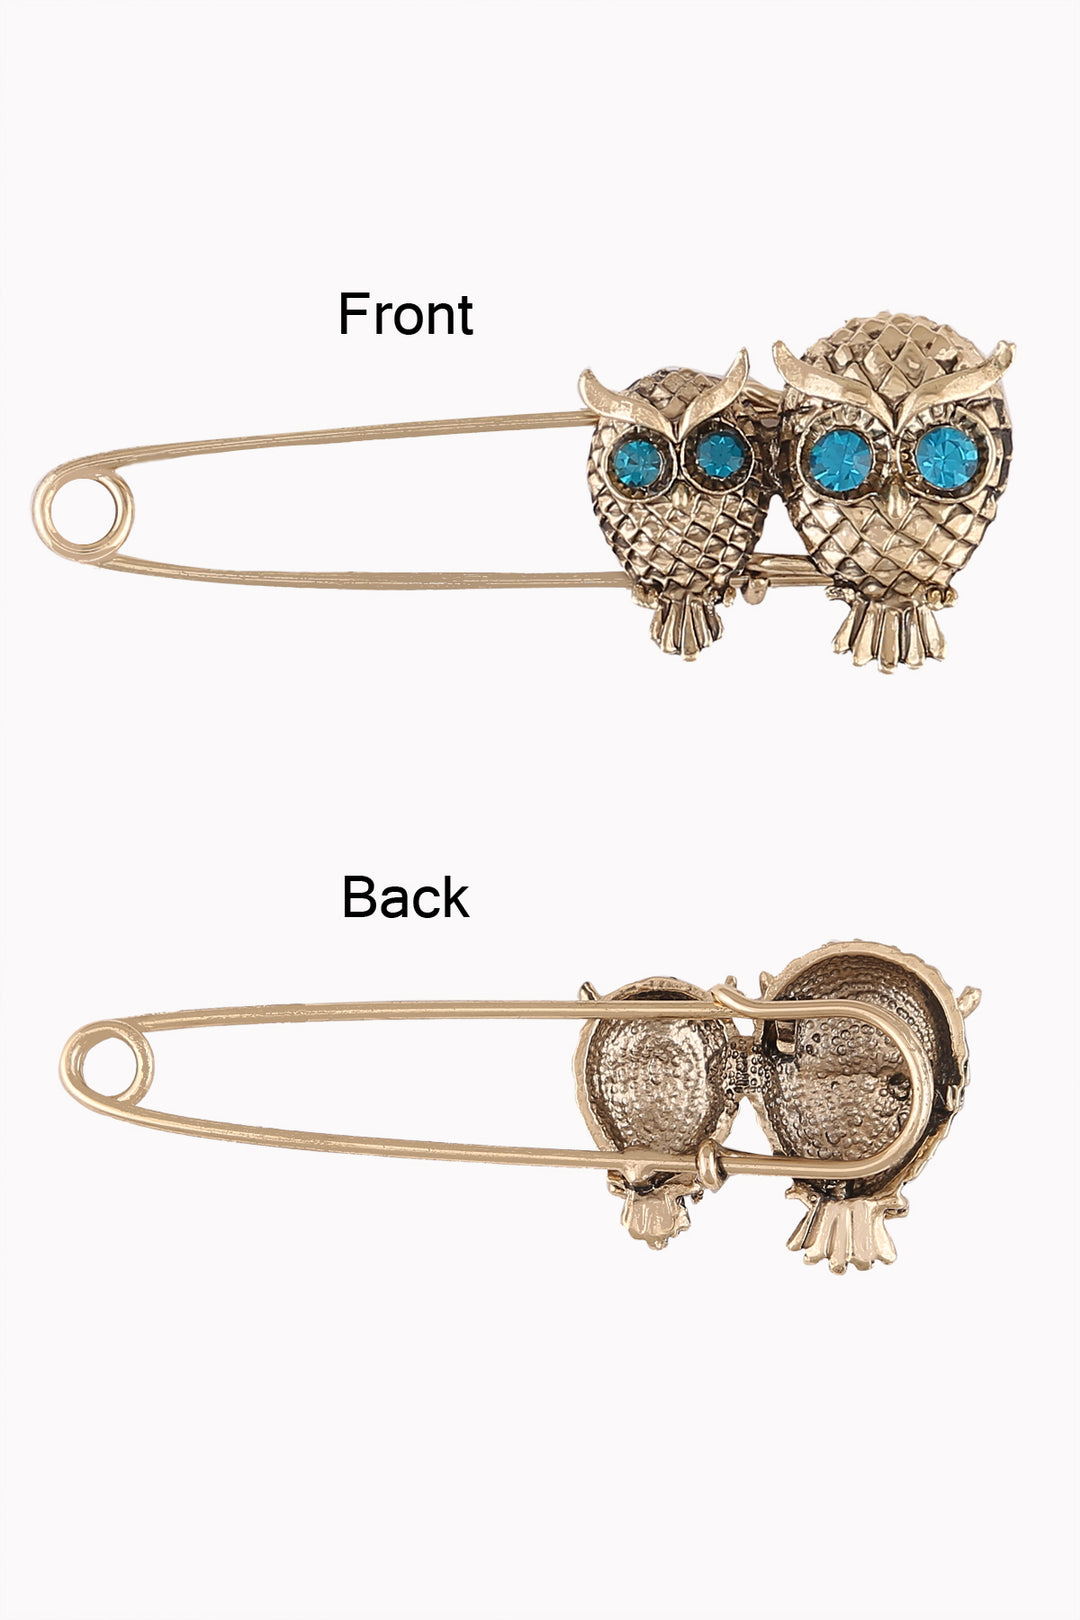 Vintage Style Antique Gold Double Owl Bird Metal Safety Pin Brooch